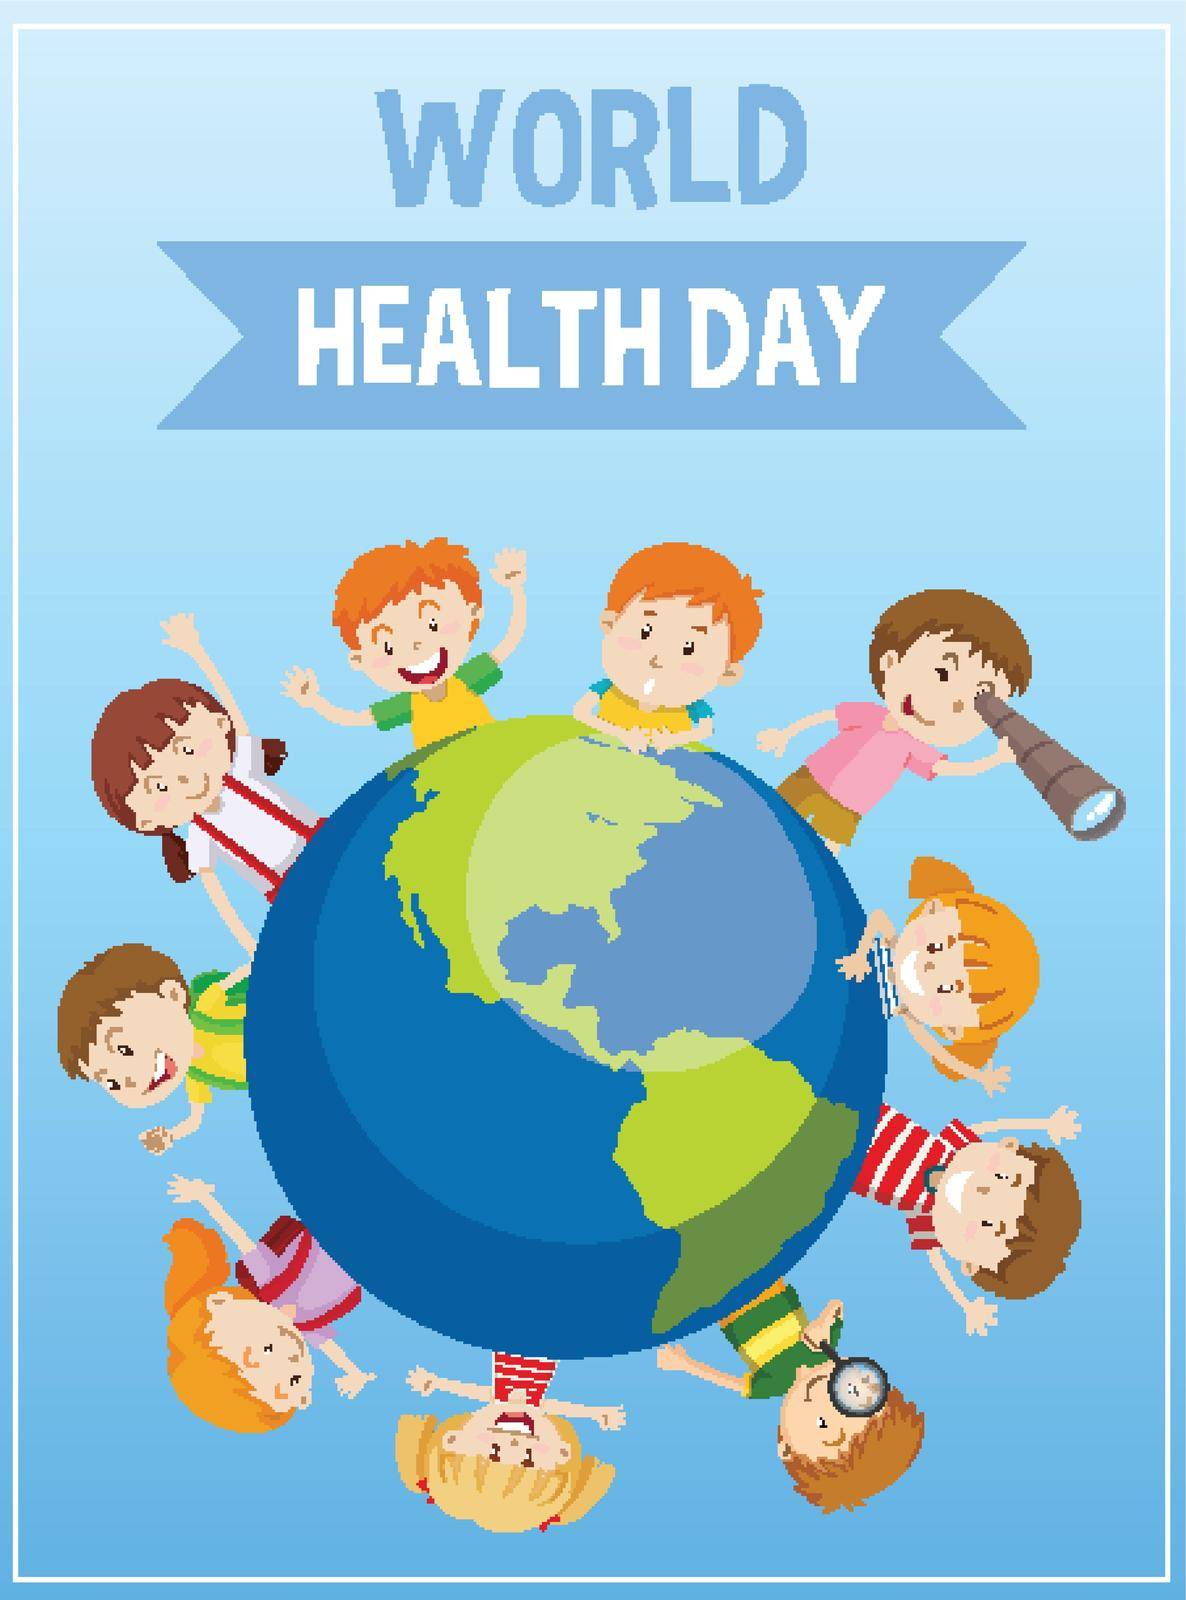 Poster design for mother earth day with happy children on earth illustration